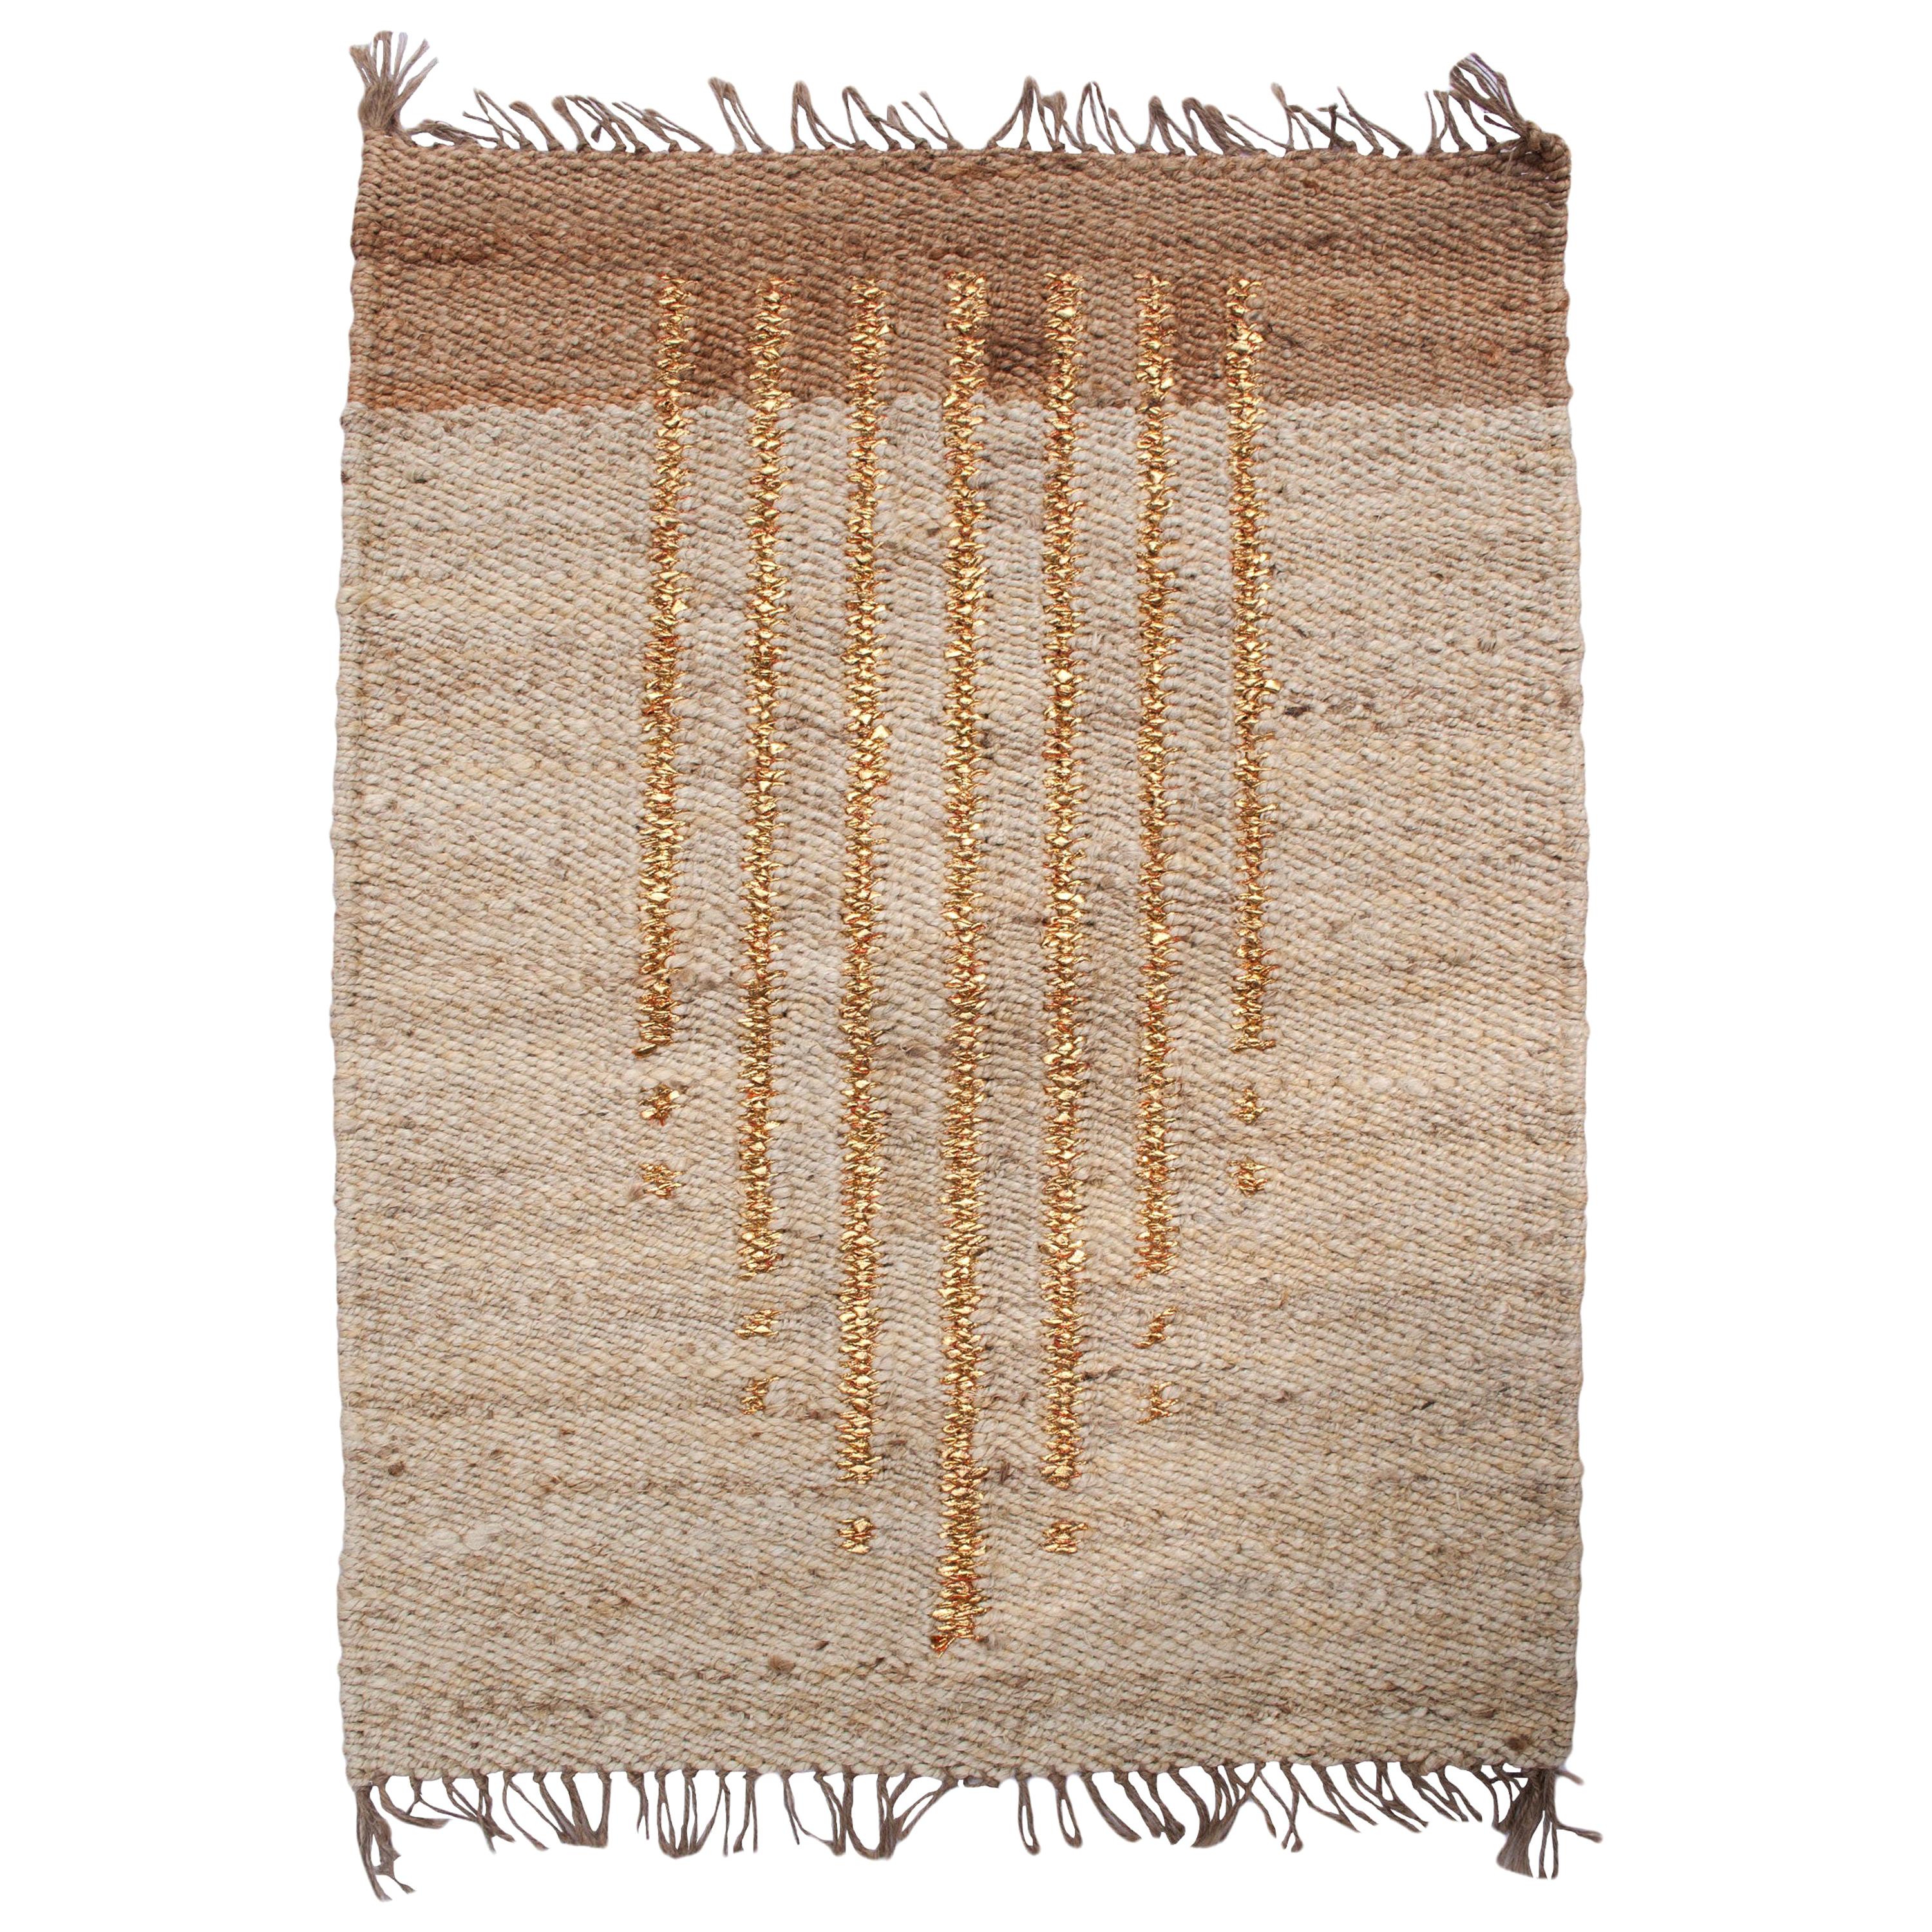 Geometric Lola Gold Lines Handwoven Modern Jute Rug, Carpet and Durrie